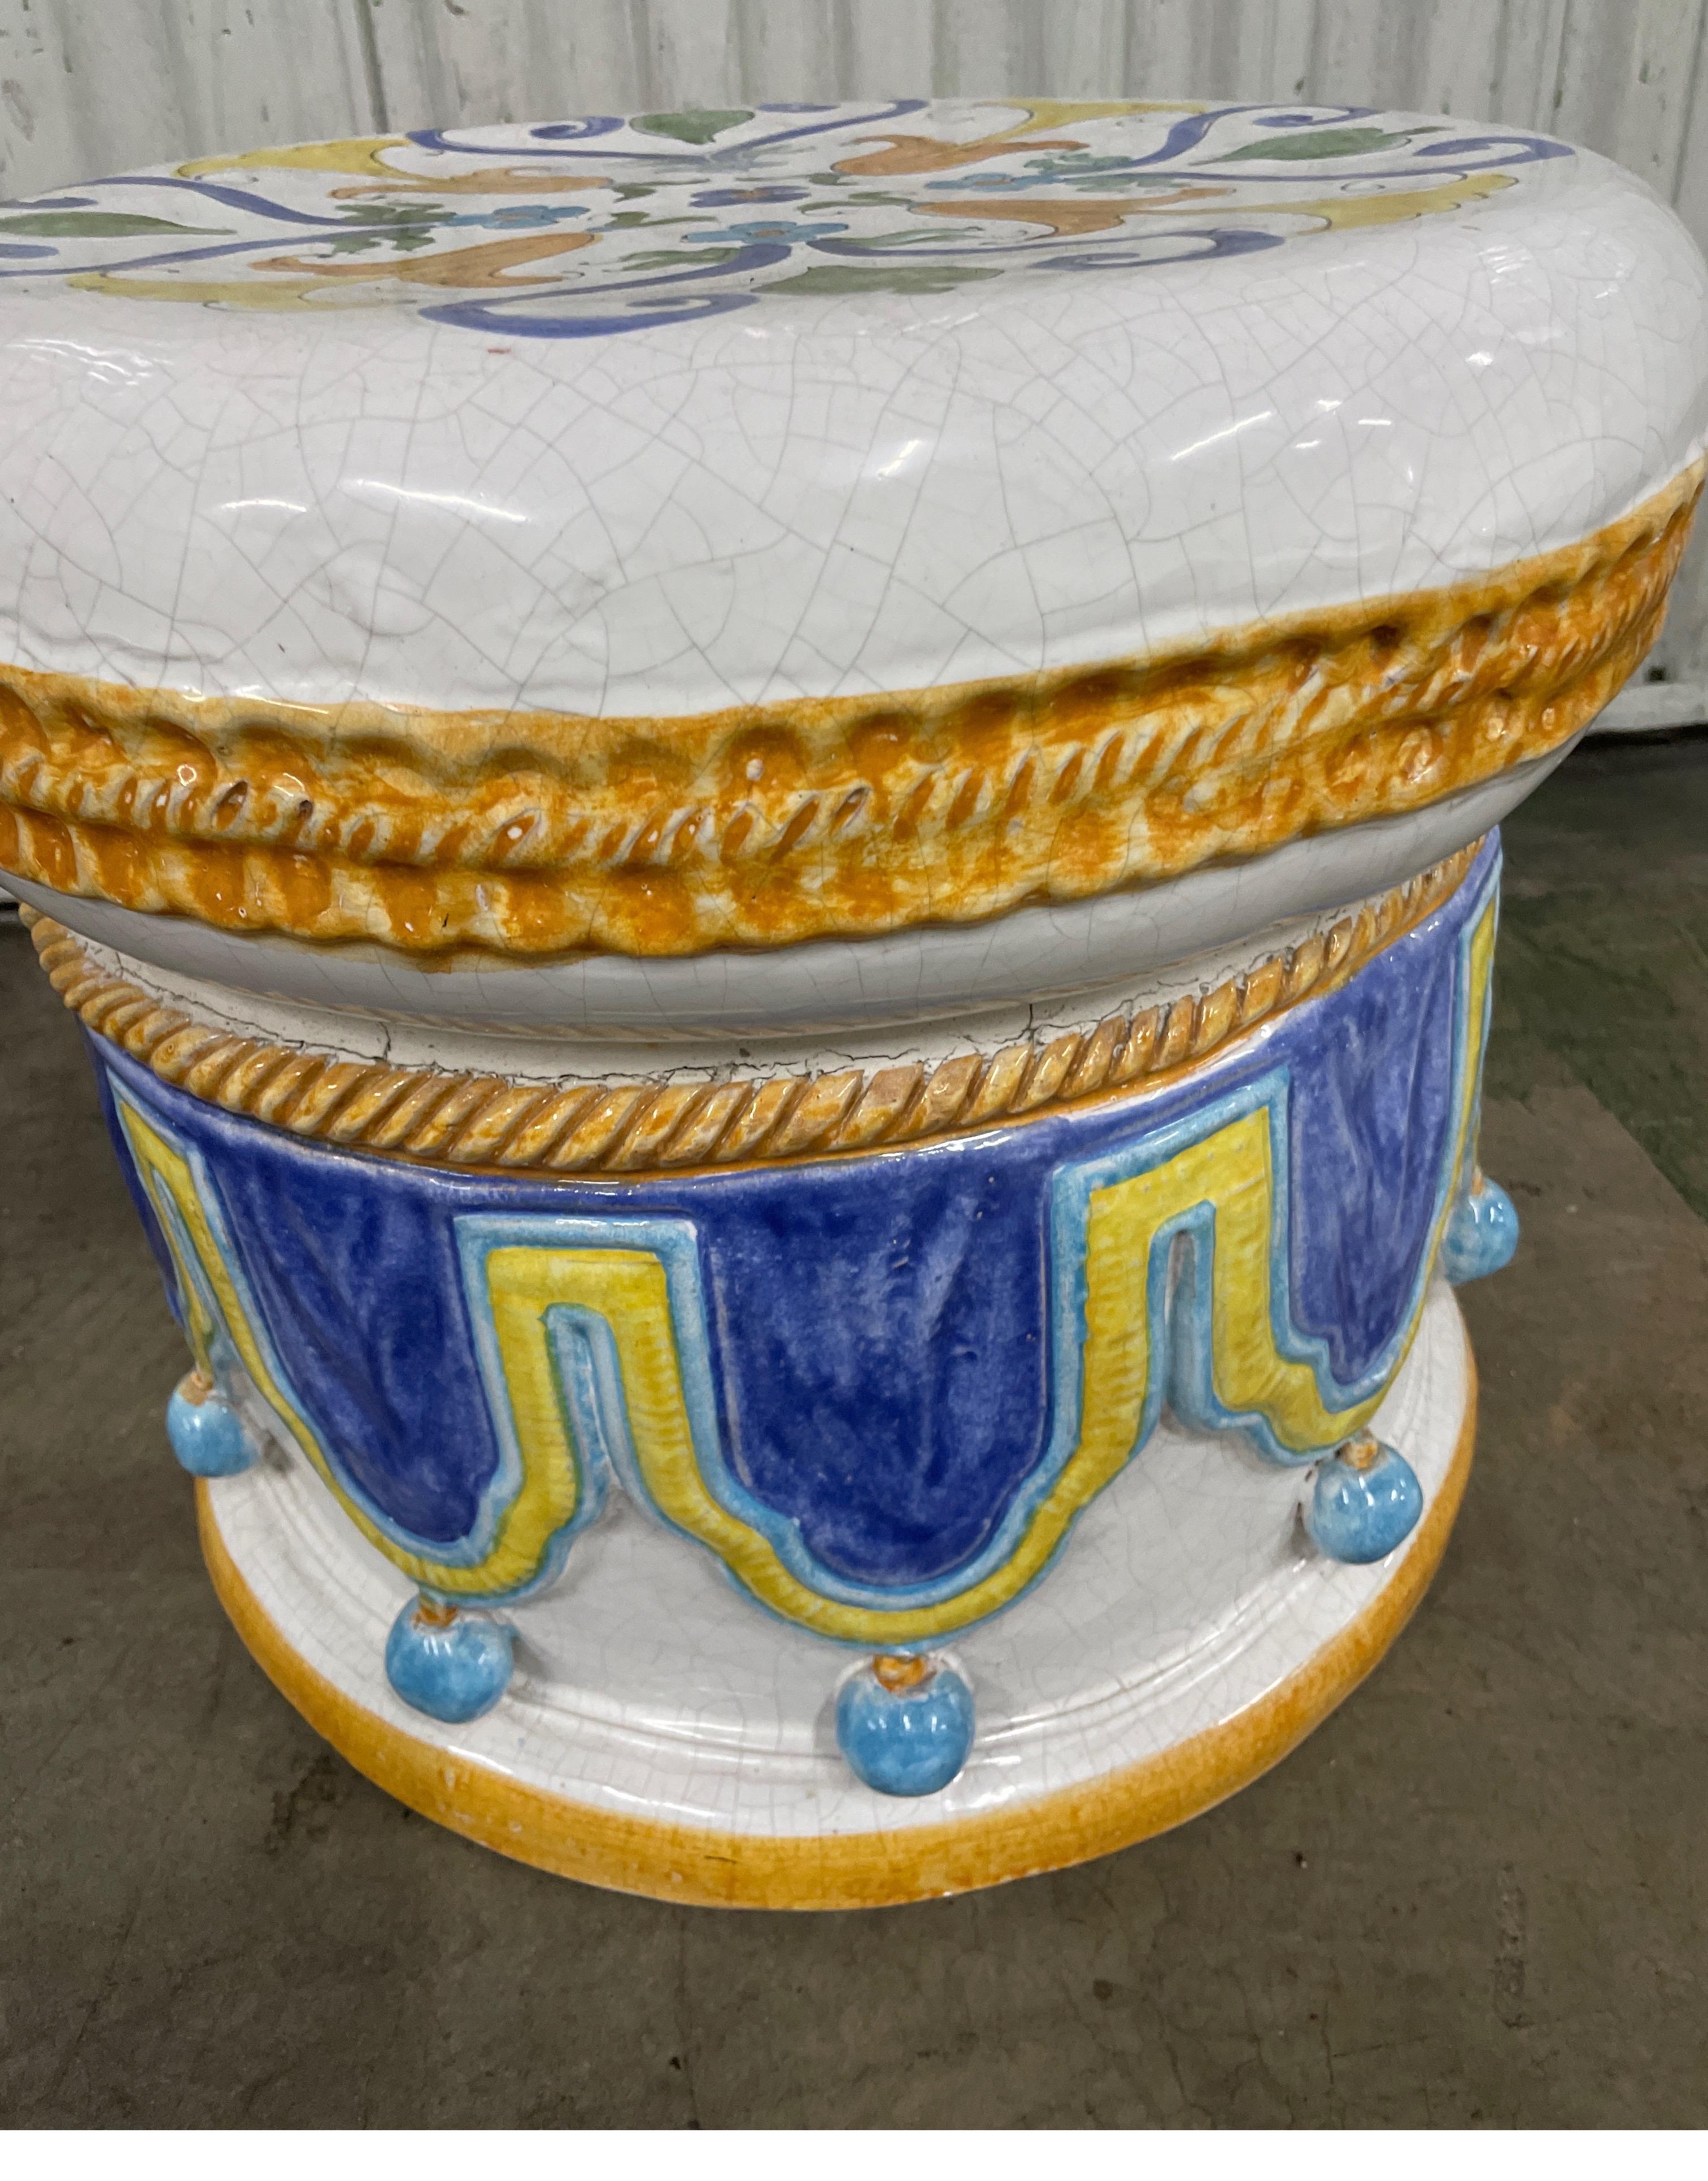 Vintage Italian glazed Terra Cotta round garden seat. Hand painted top and sides with swags, ropes and balls. Very colorful & unique majolica piece.